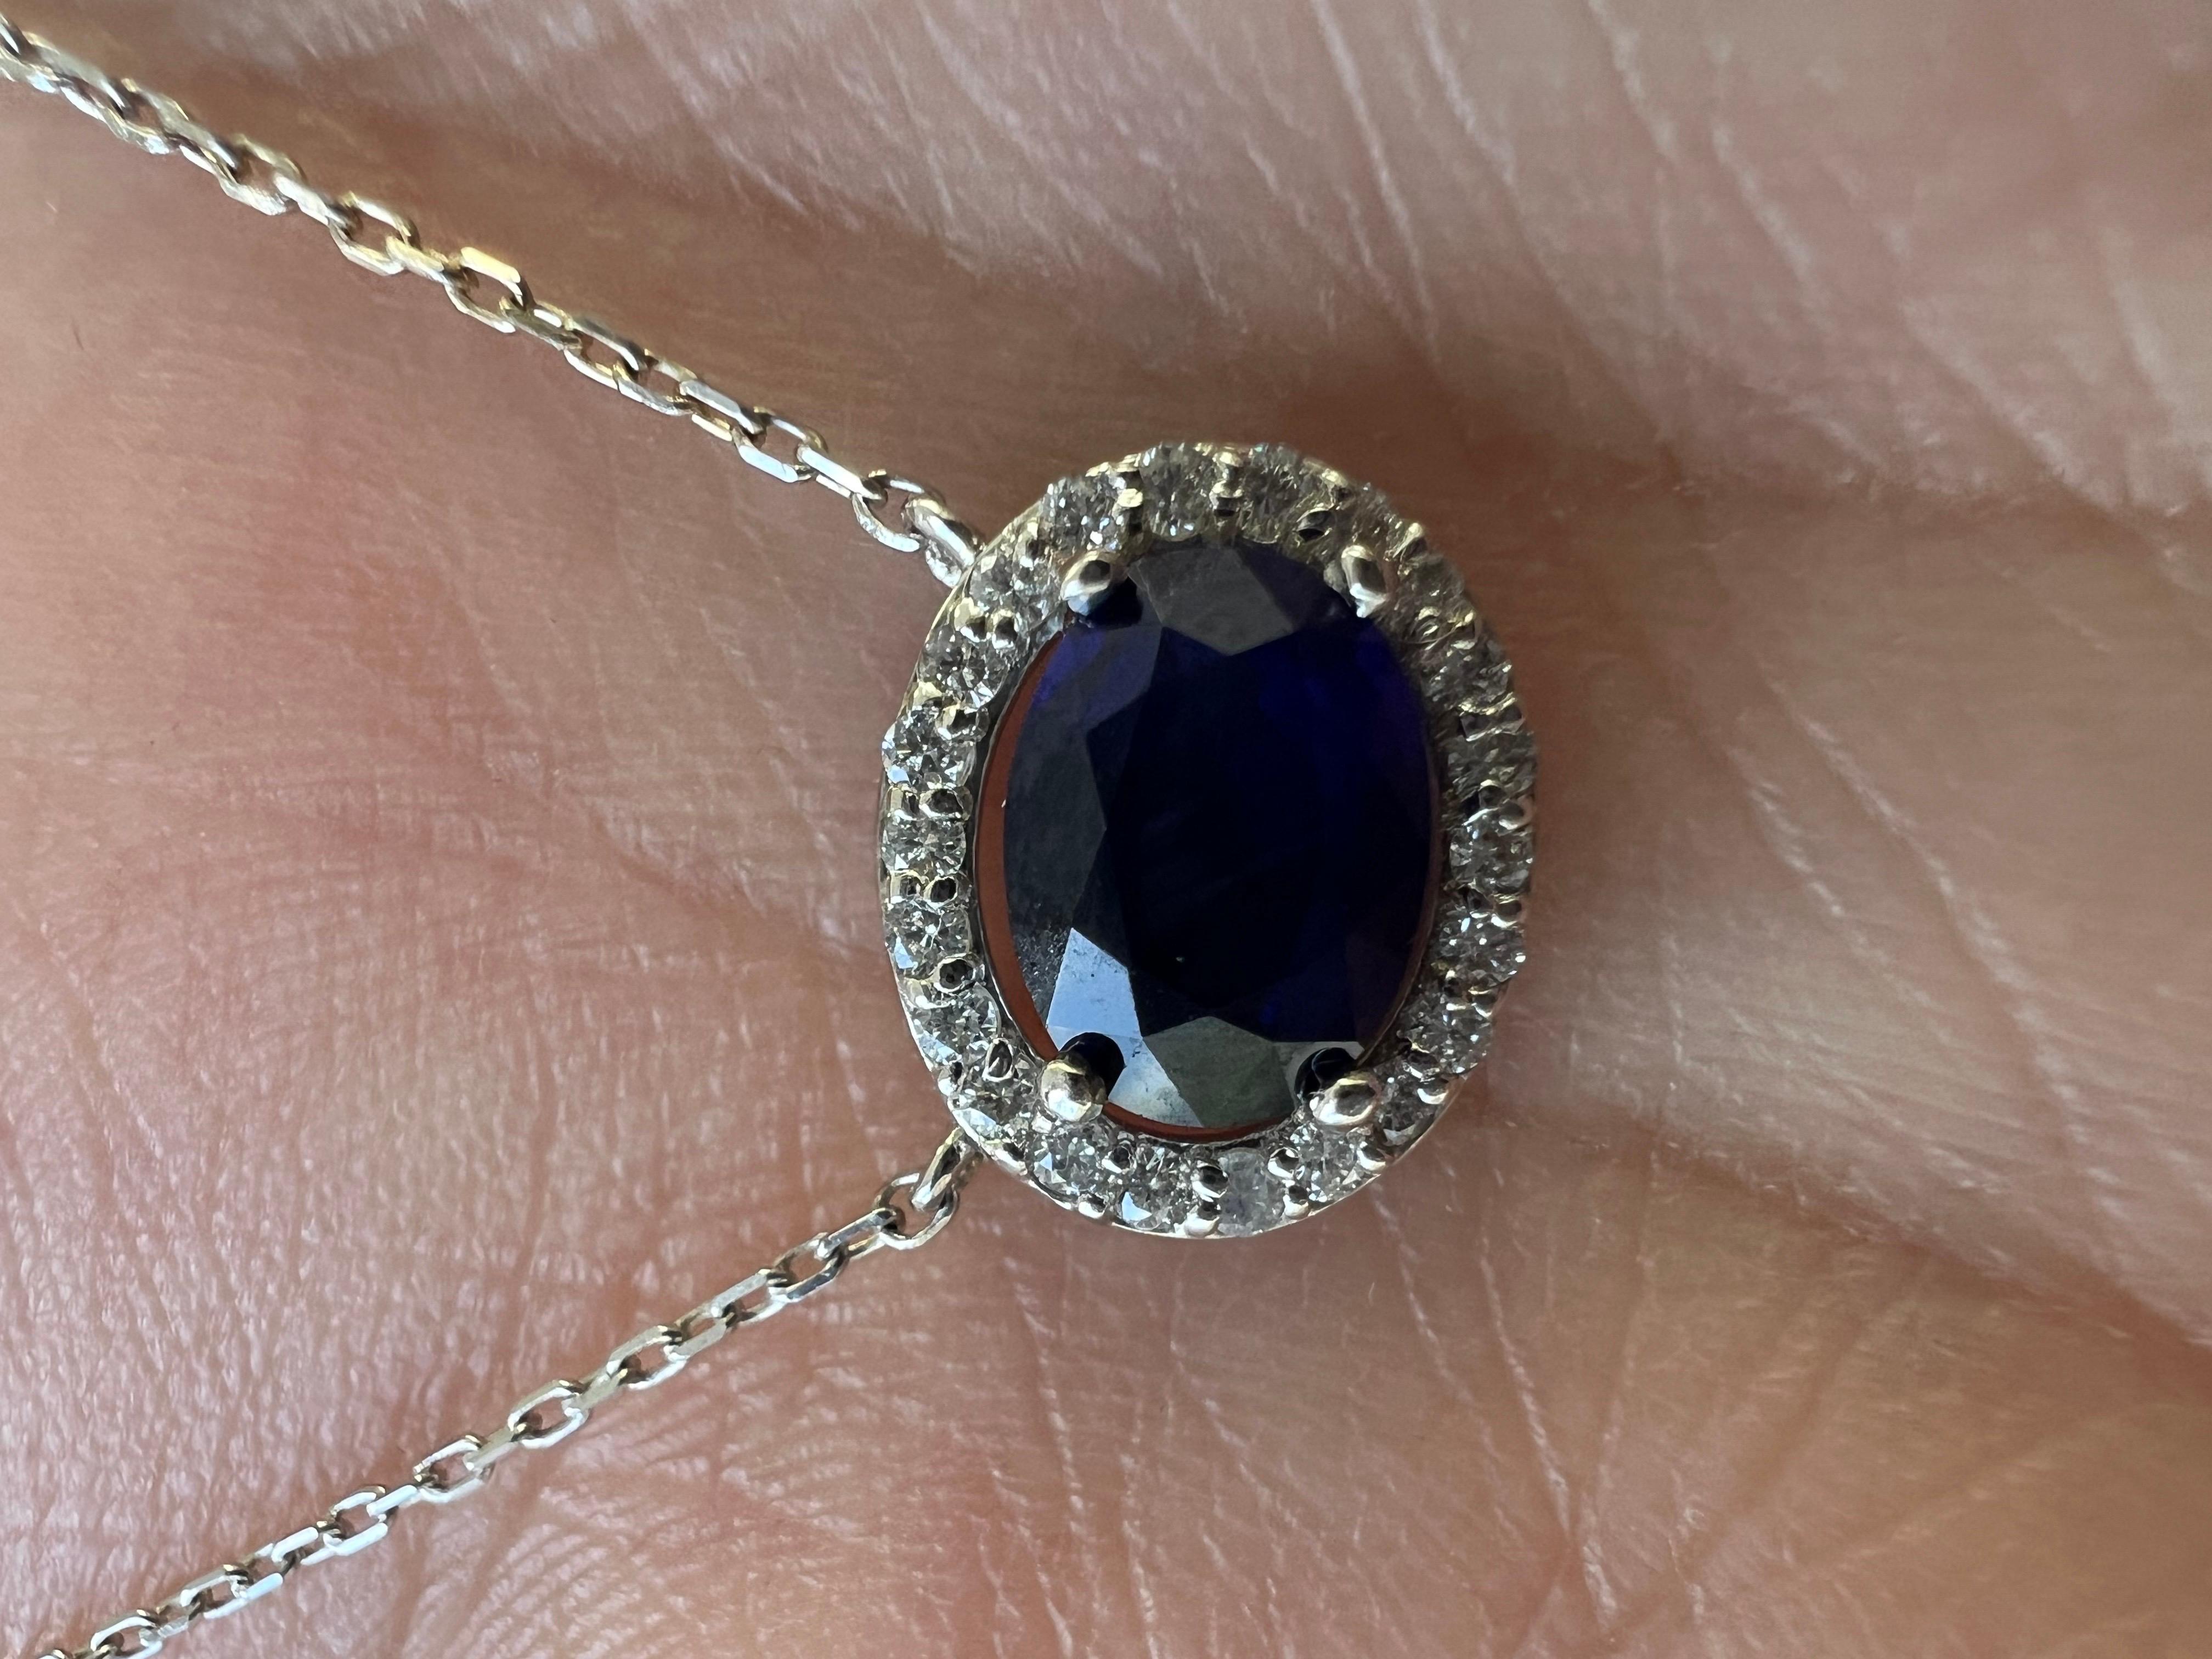 Natural Blue Sapphire Diamond Pendant 
1.97 Carat of Natural Blue Sapphire set in a 14k White Gold Diamond Pendant with Natural Full Cut Diamonds. East/West Setting. Perfect for every occasion.